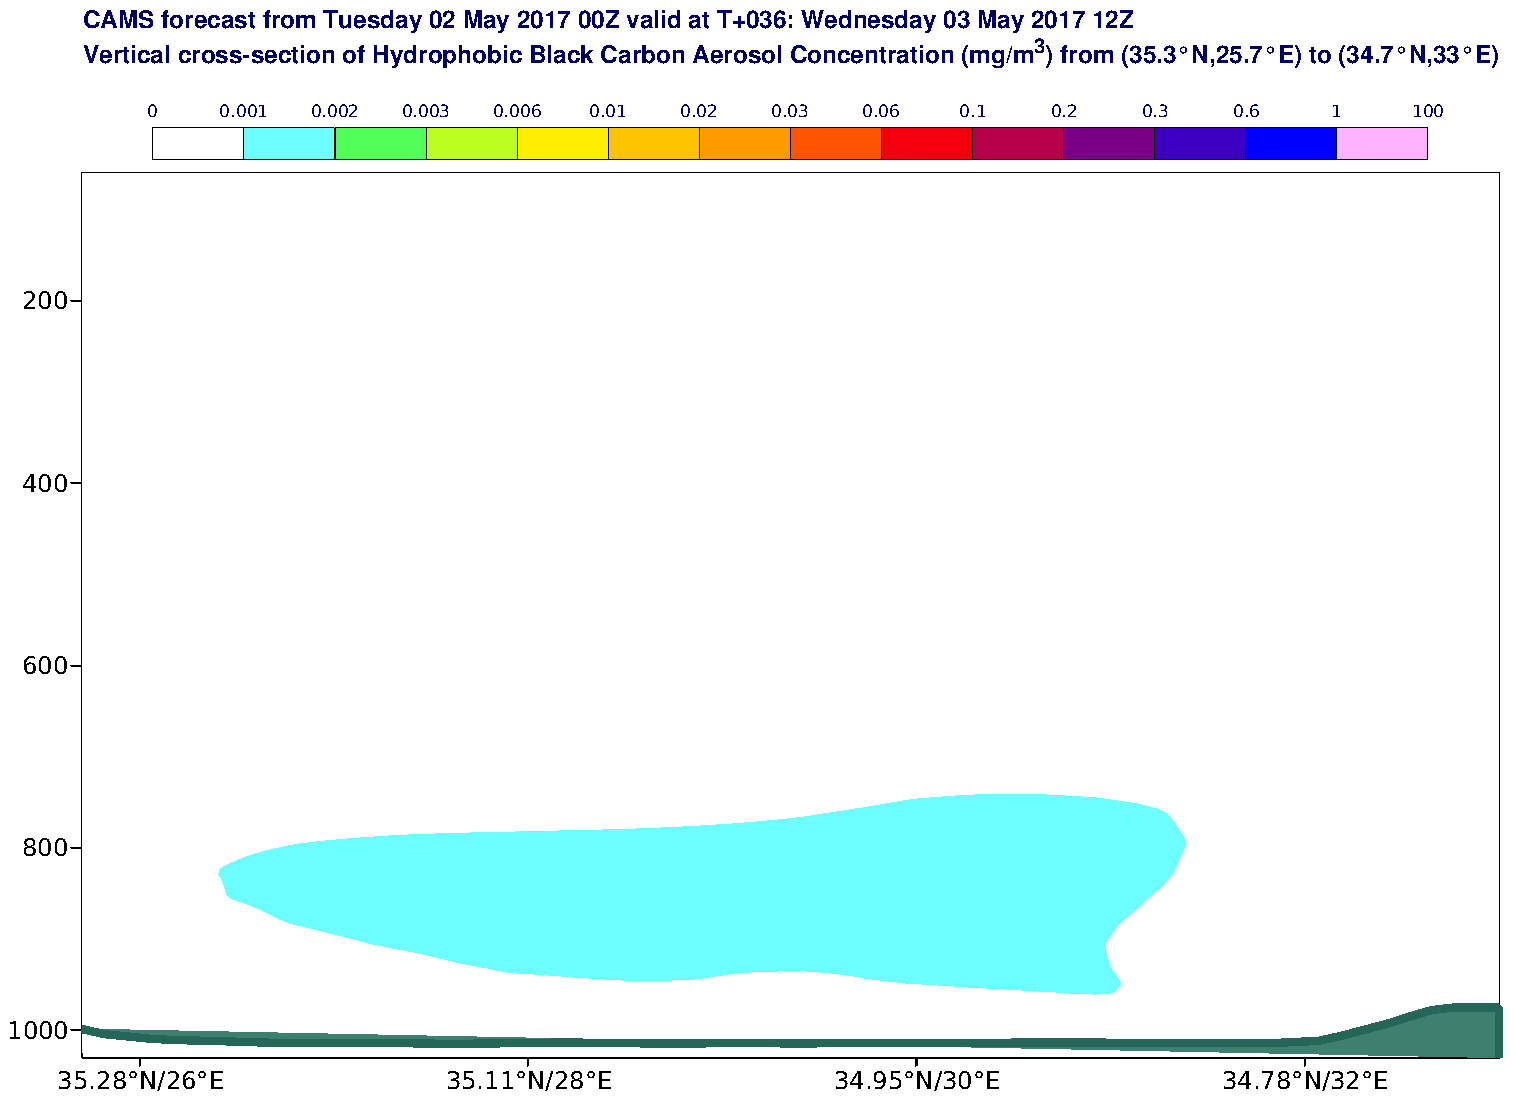 Vertical cross-section of Hydrophobic Black Carbon Aerosol Concentration (mg/m3) valid at T36 - 2017-05-03 12:00